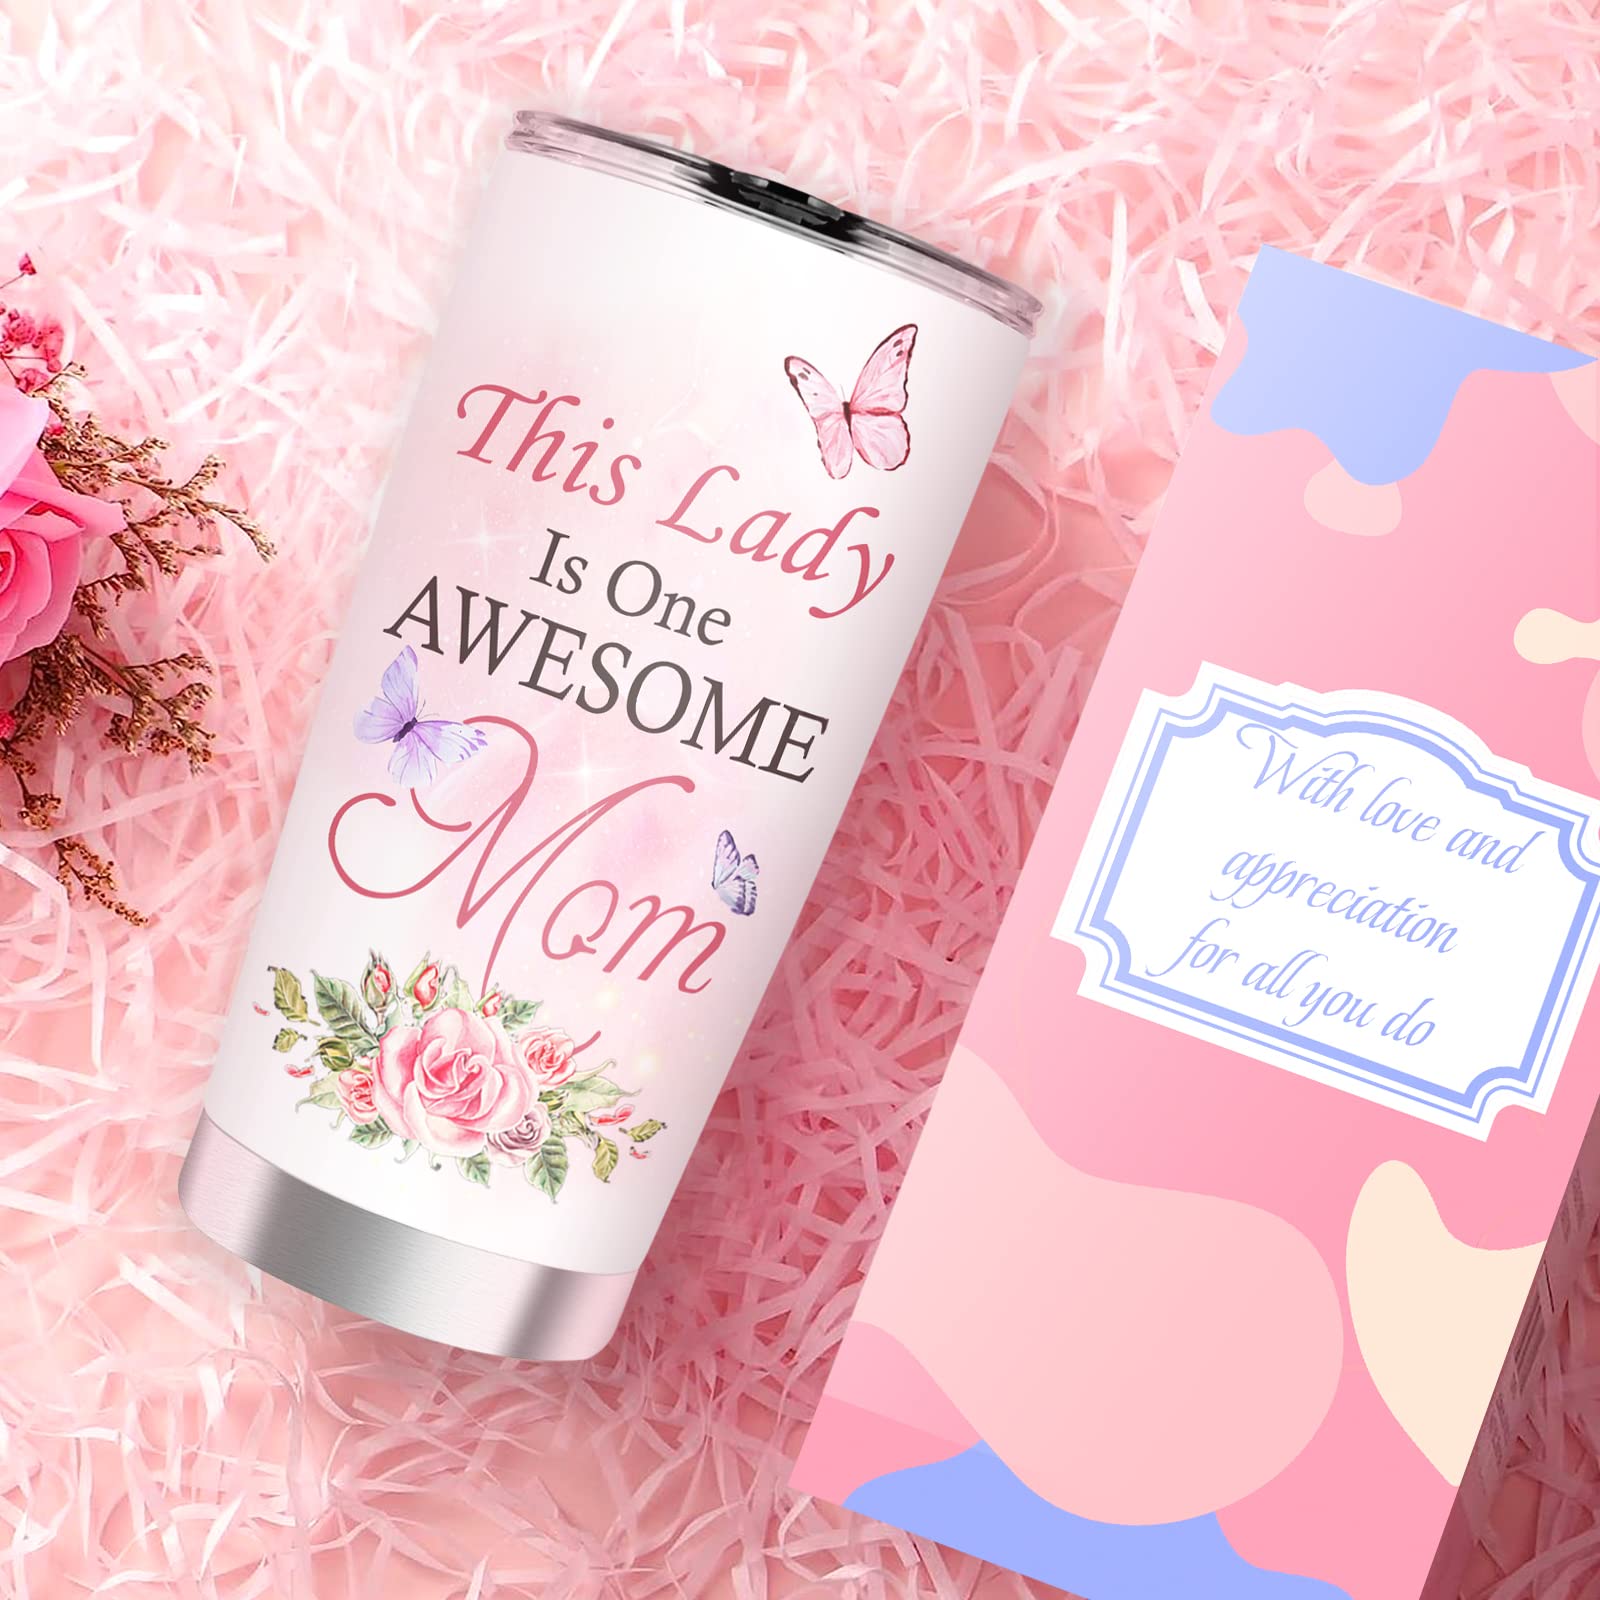 WNNNS Gifts for Mom - 20oz Pink Butterfly Gifts Stainless Steel Tumbler-Mother's Day Gifts for Mom From Daughter Son- Personalized Butterfly Cup Gifts Insulated Travel Coffee Mug with Lid.